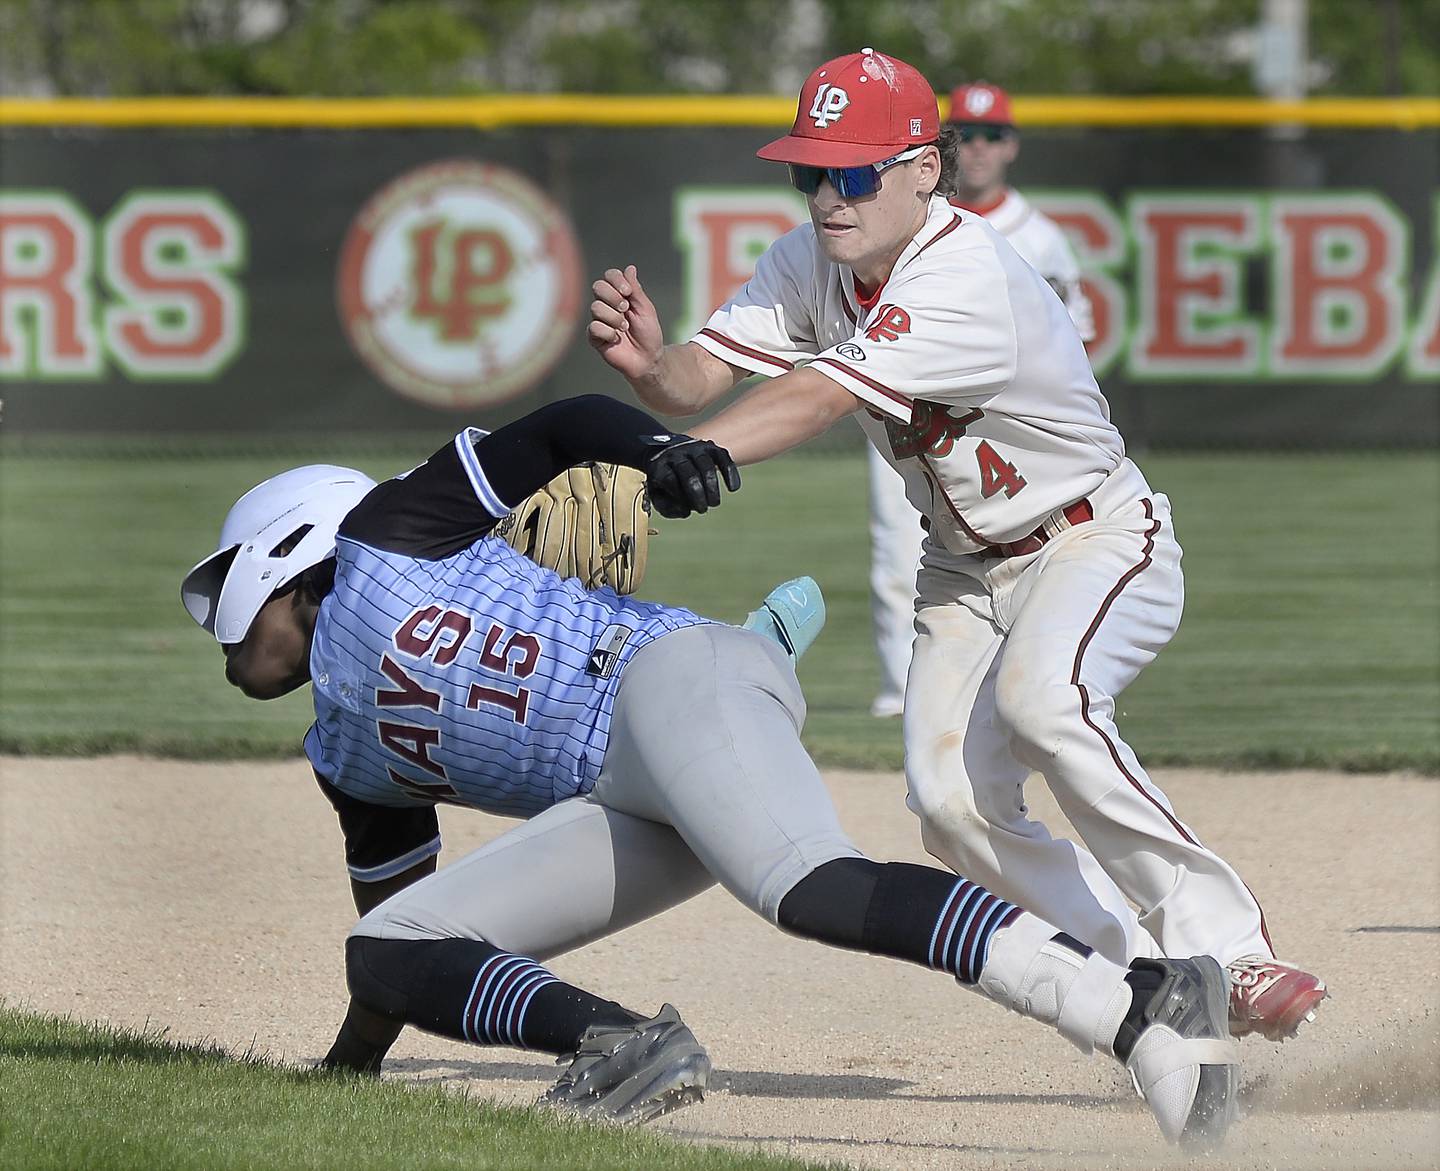 La Salle-Peru’s Jack Jereb tags out Kankakee’s Byron Wills, who was caught in a rundown, on Monday, May 22, 2023 in Oglesby.